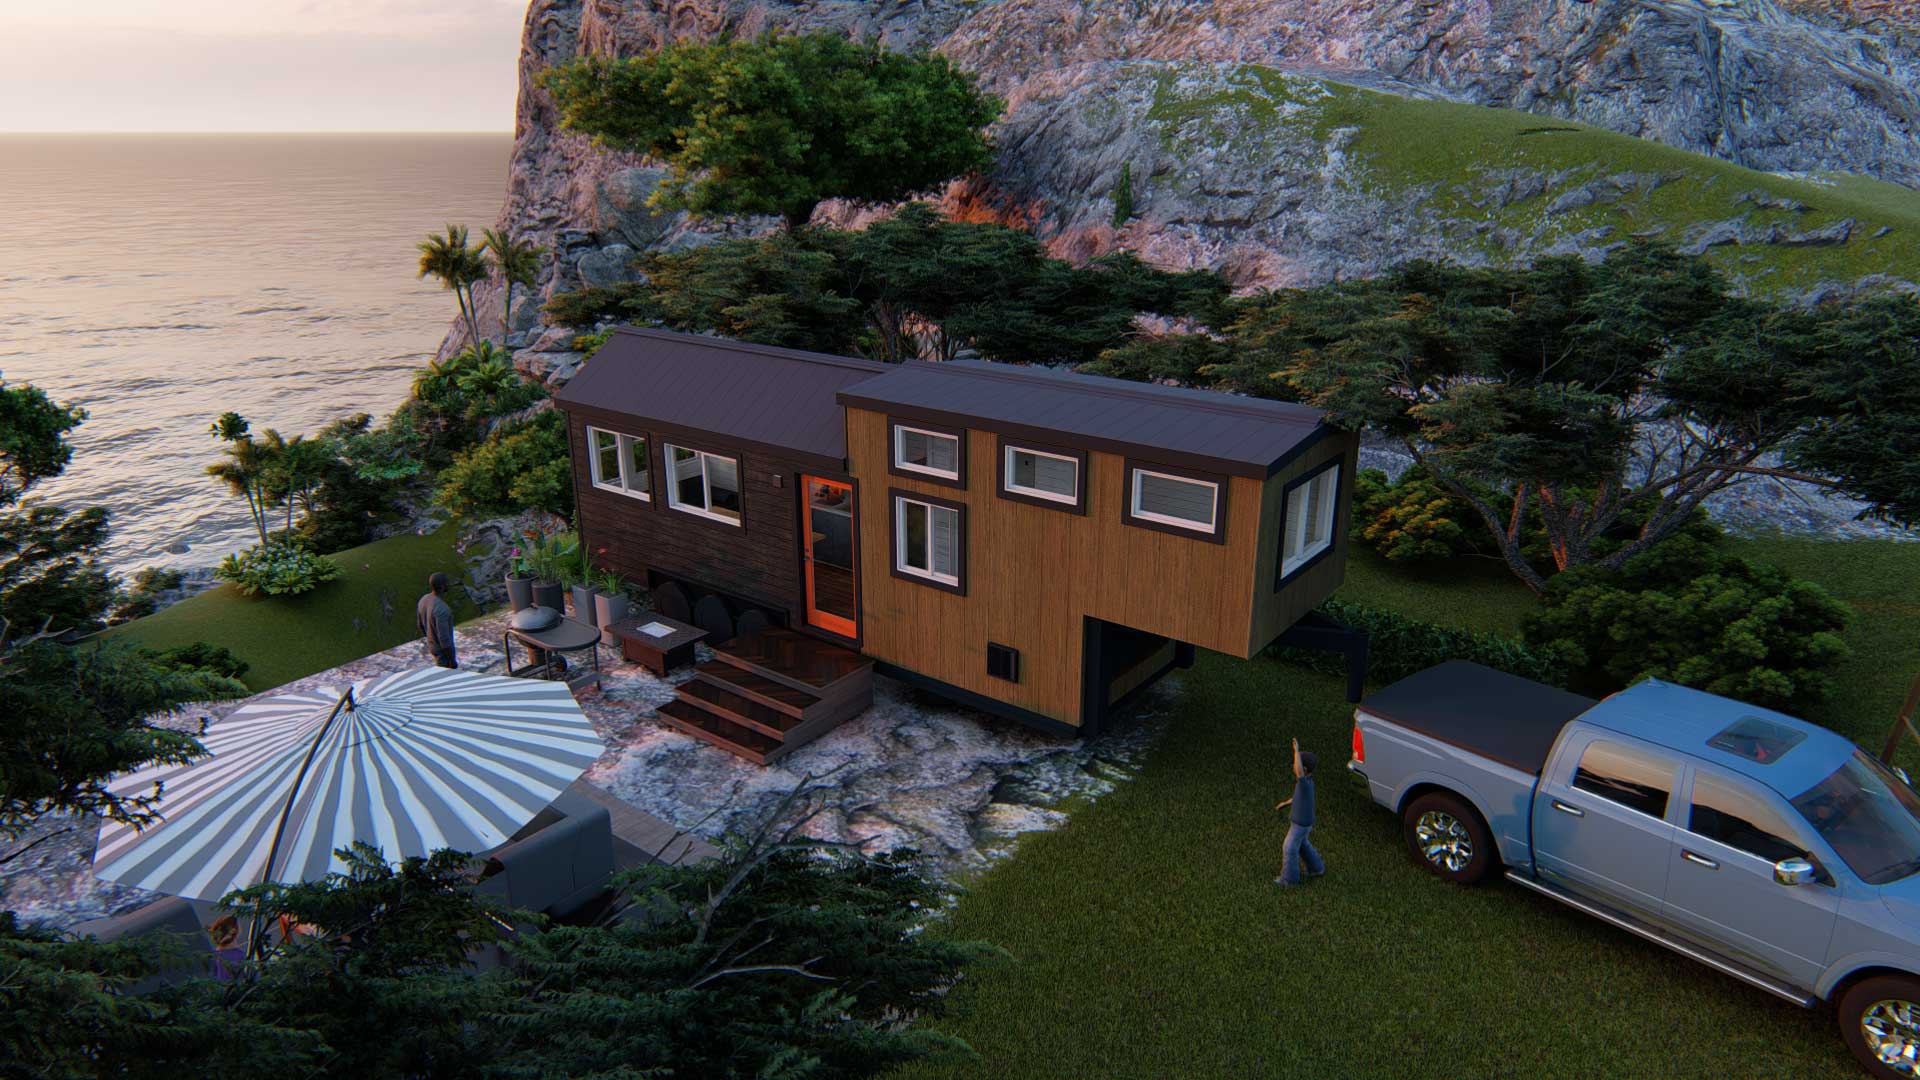 Overhead 3D model of a Majesty modern tiny home by the coast